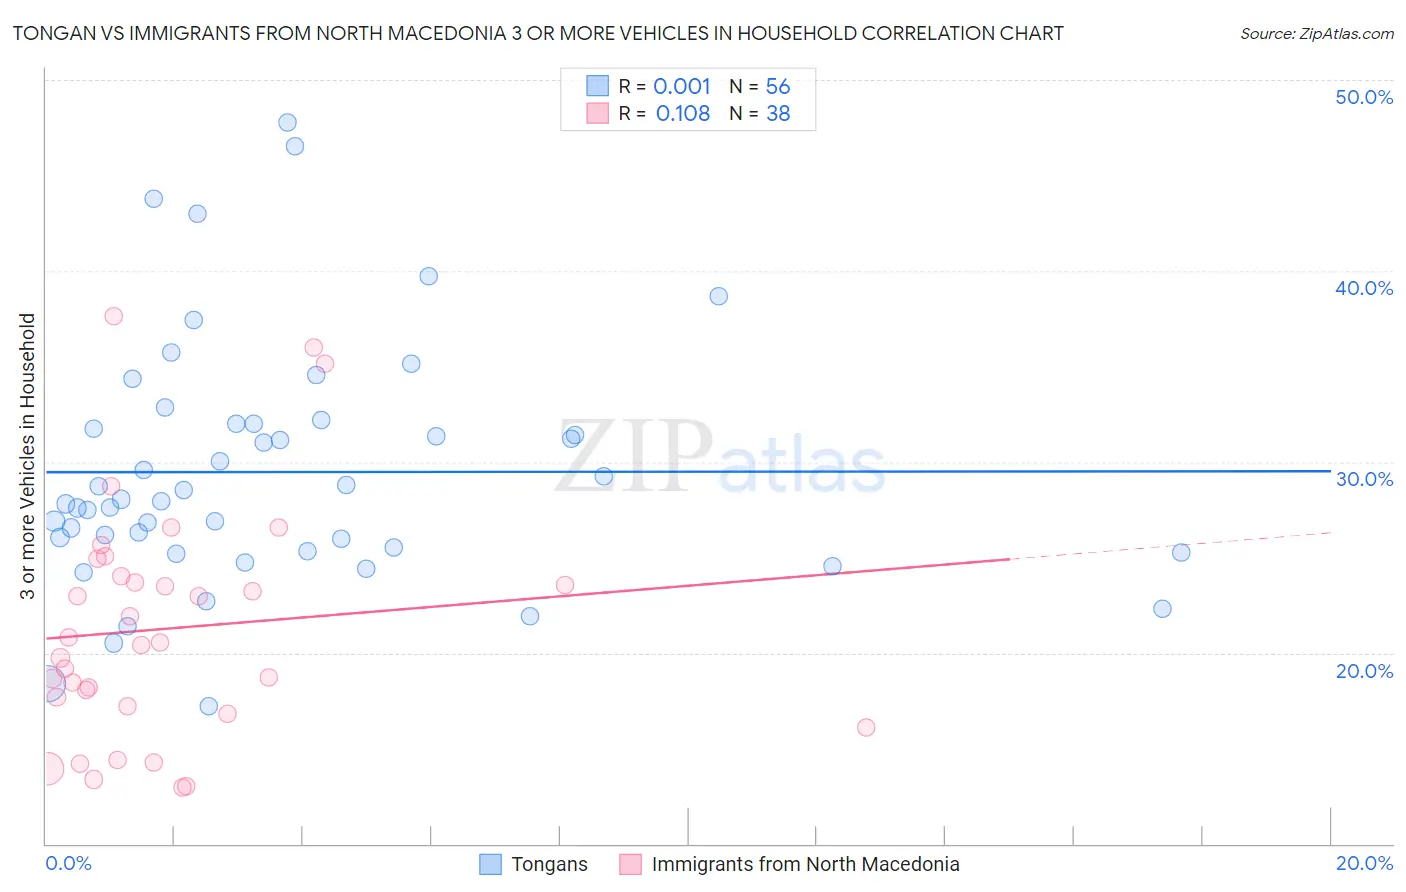 Tongan vs Immigrants from North Macedonia 3 or more Vehicles in Household